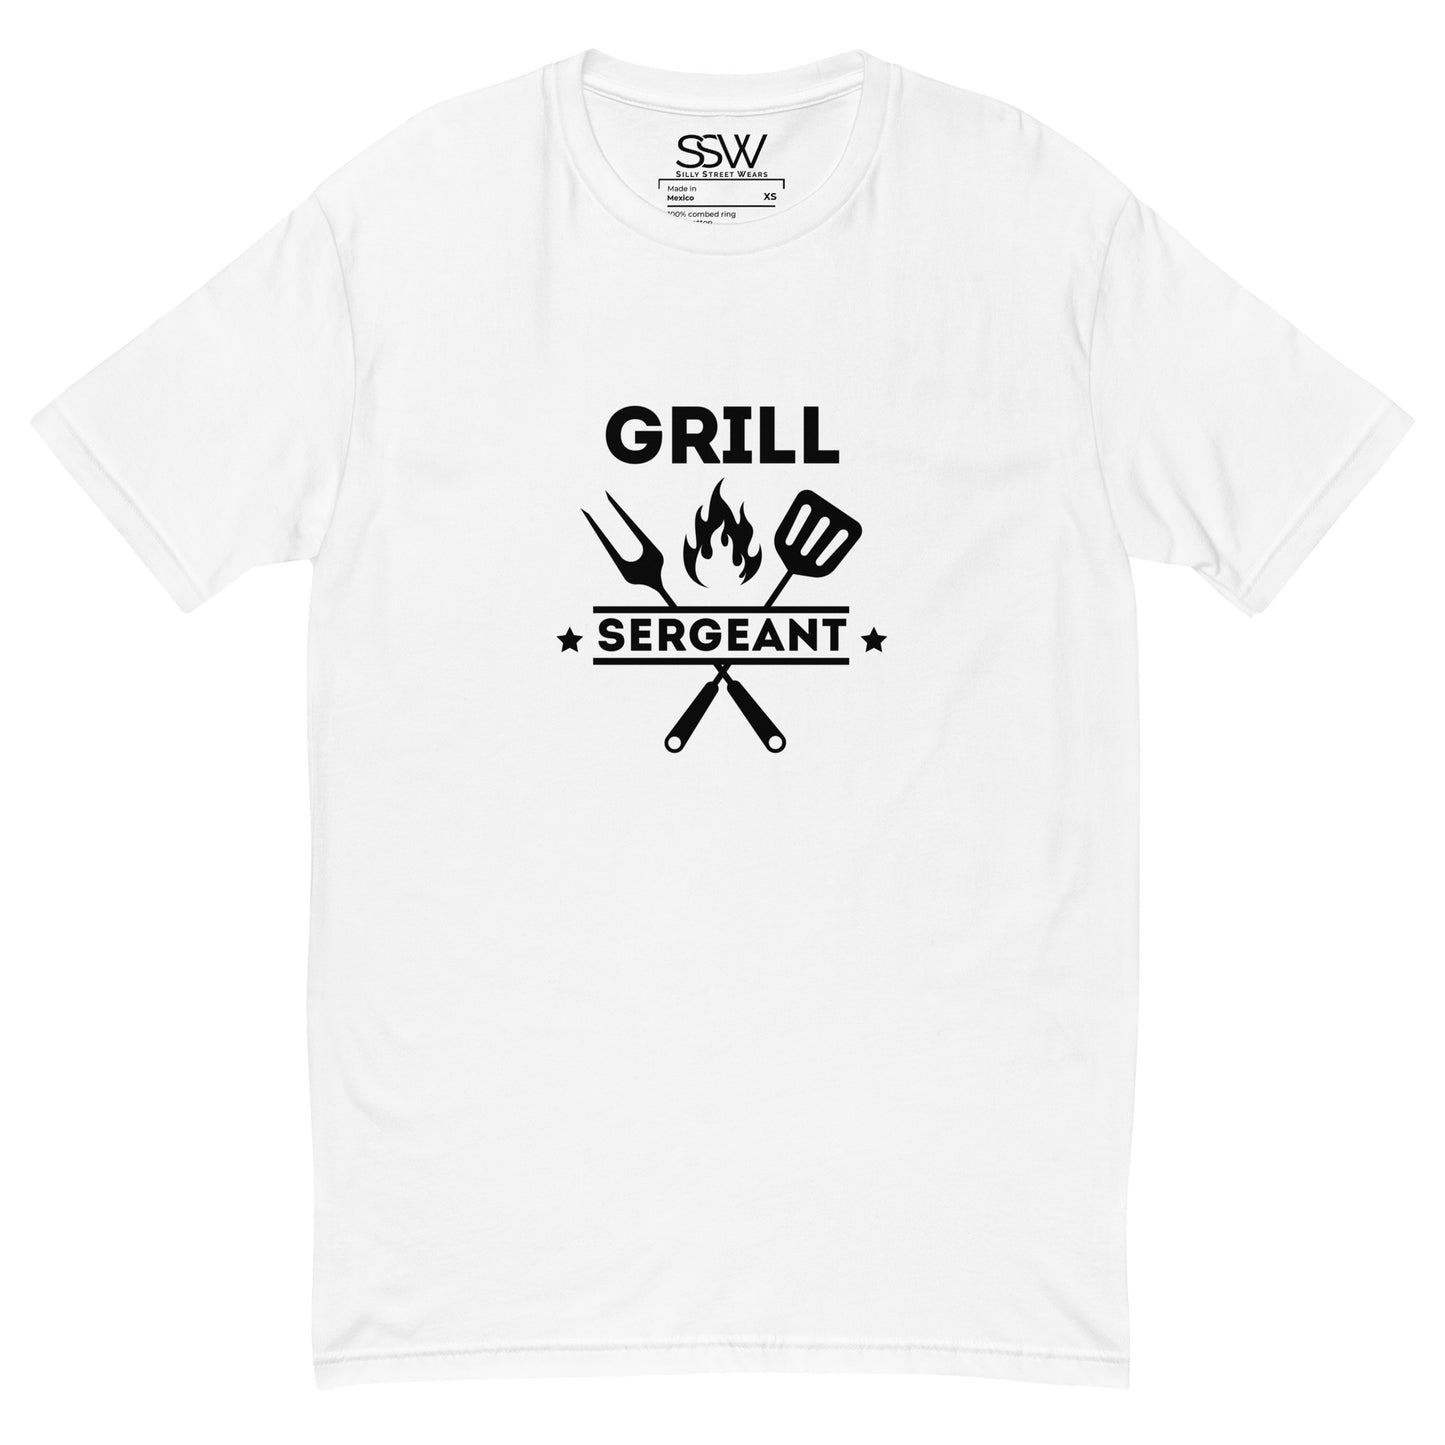 Grill sergeant Fitted T-shirt